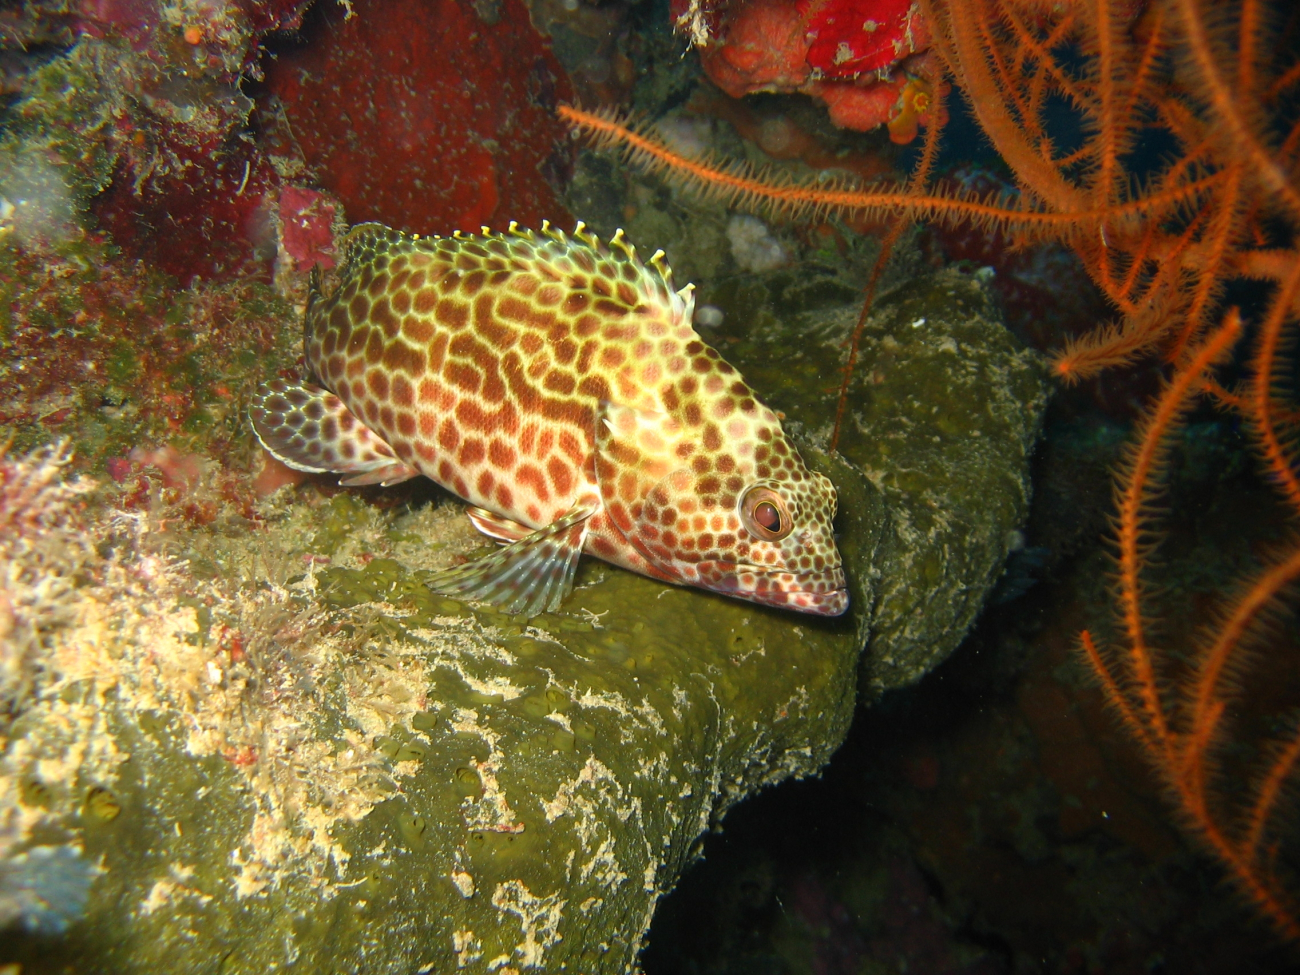 A close-up of the grouper in image reef0514